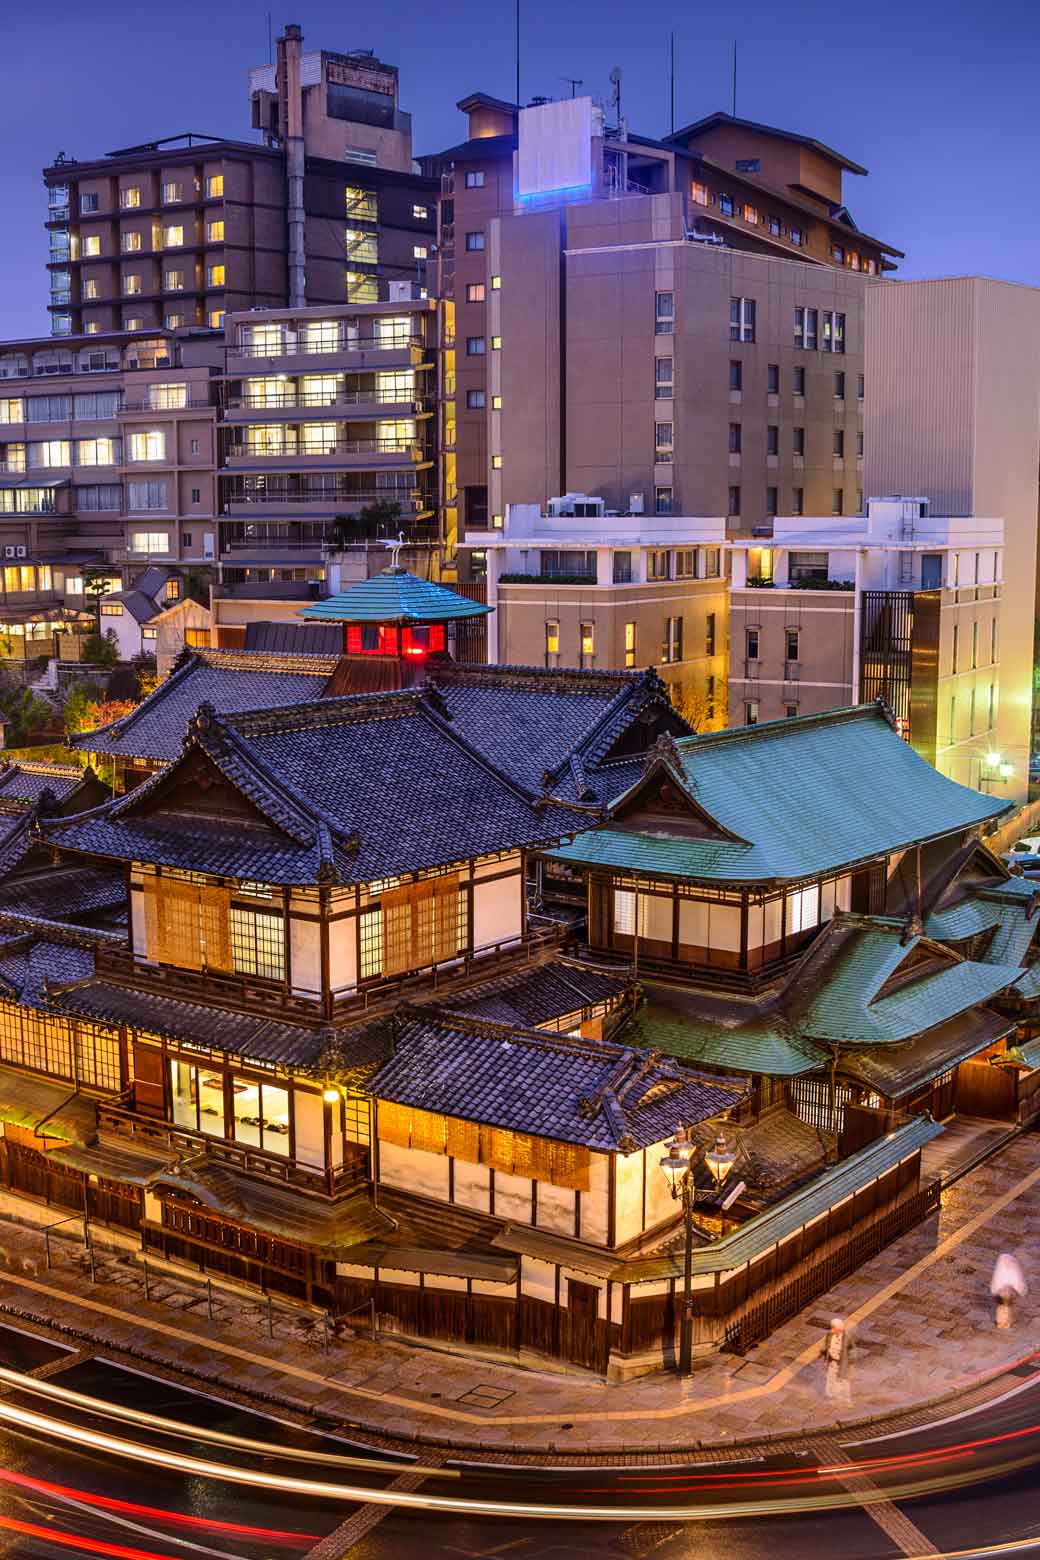 Relaxation and tradition at Dogo Onsen